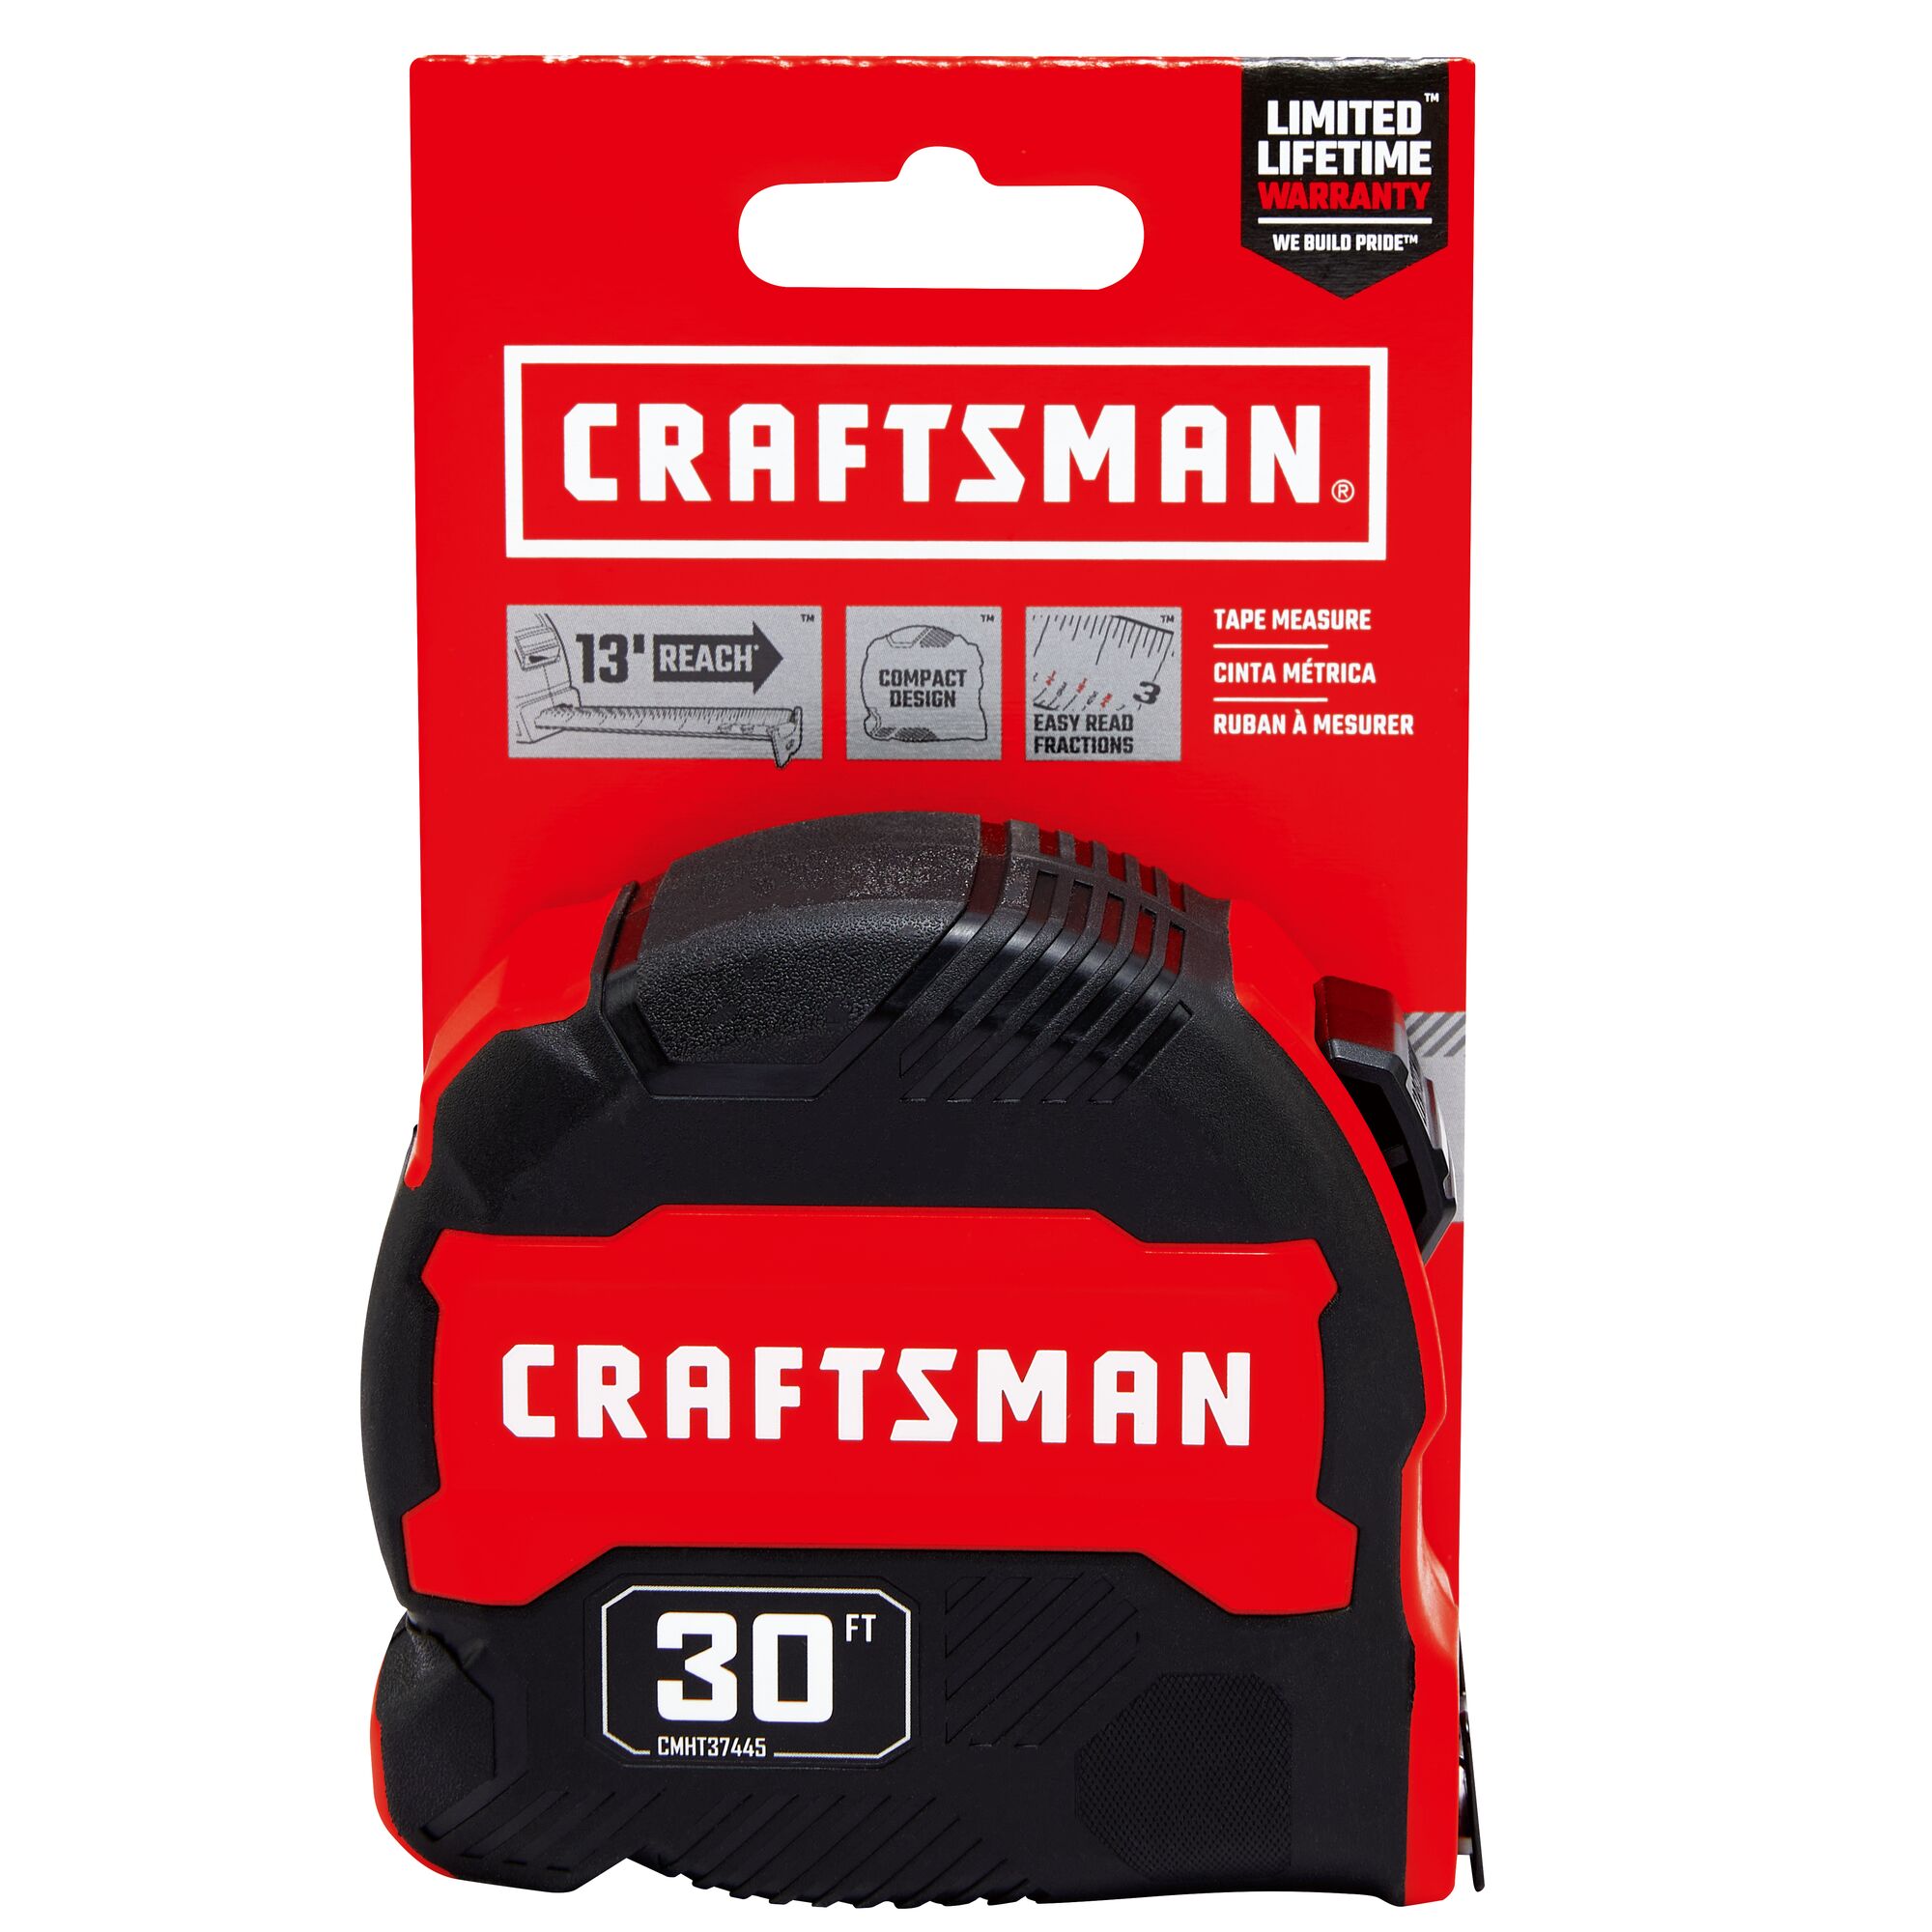 CRAFTSMAN Grip Tape in packaging on white background